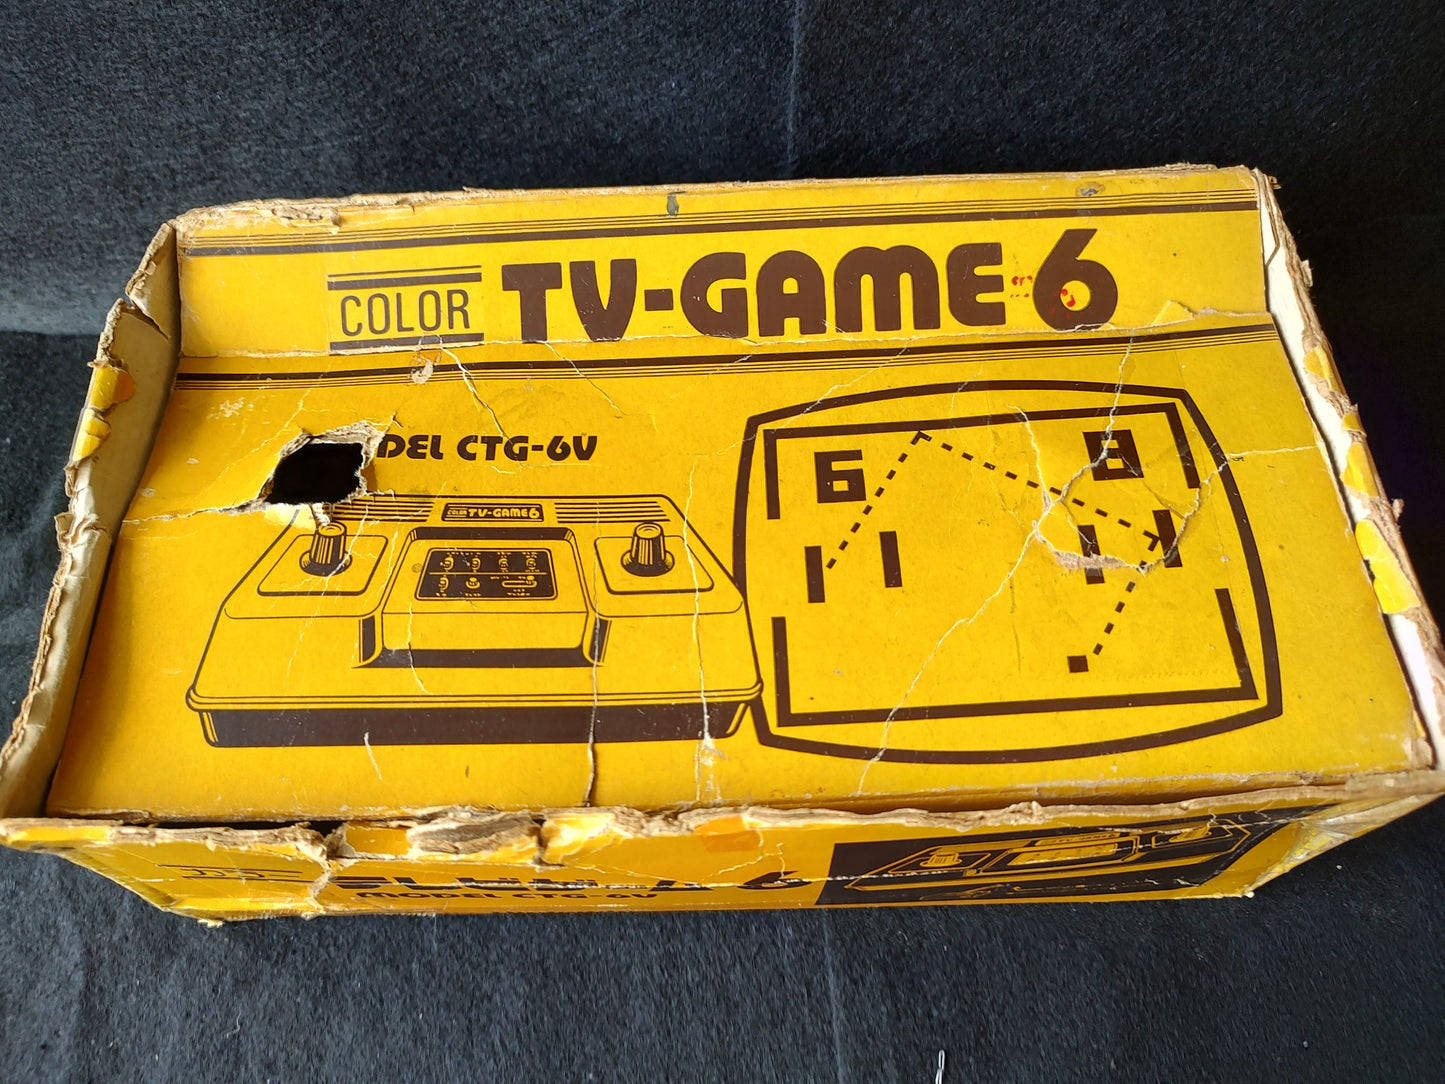 Nintendo TV GAME 6 (CTG-6V) Console,RF switch,Manual,Boxed set Tested-f0712-